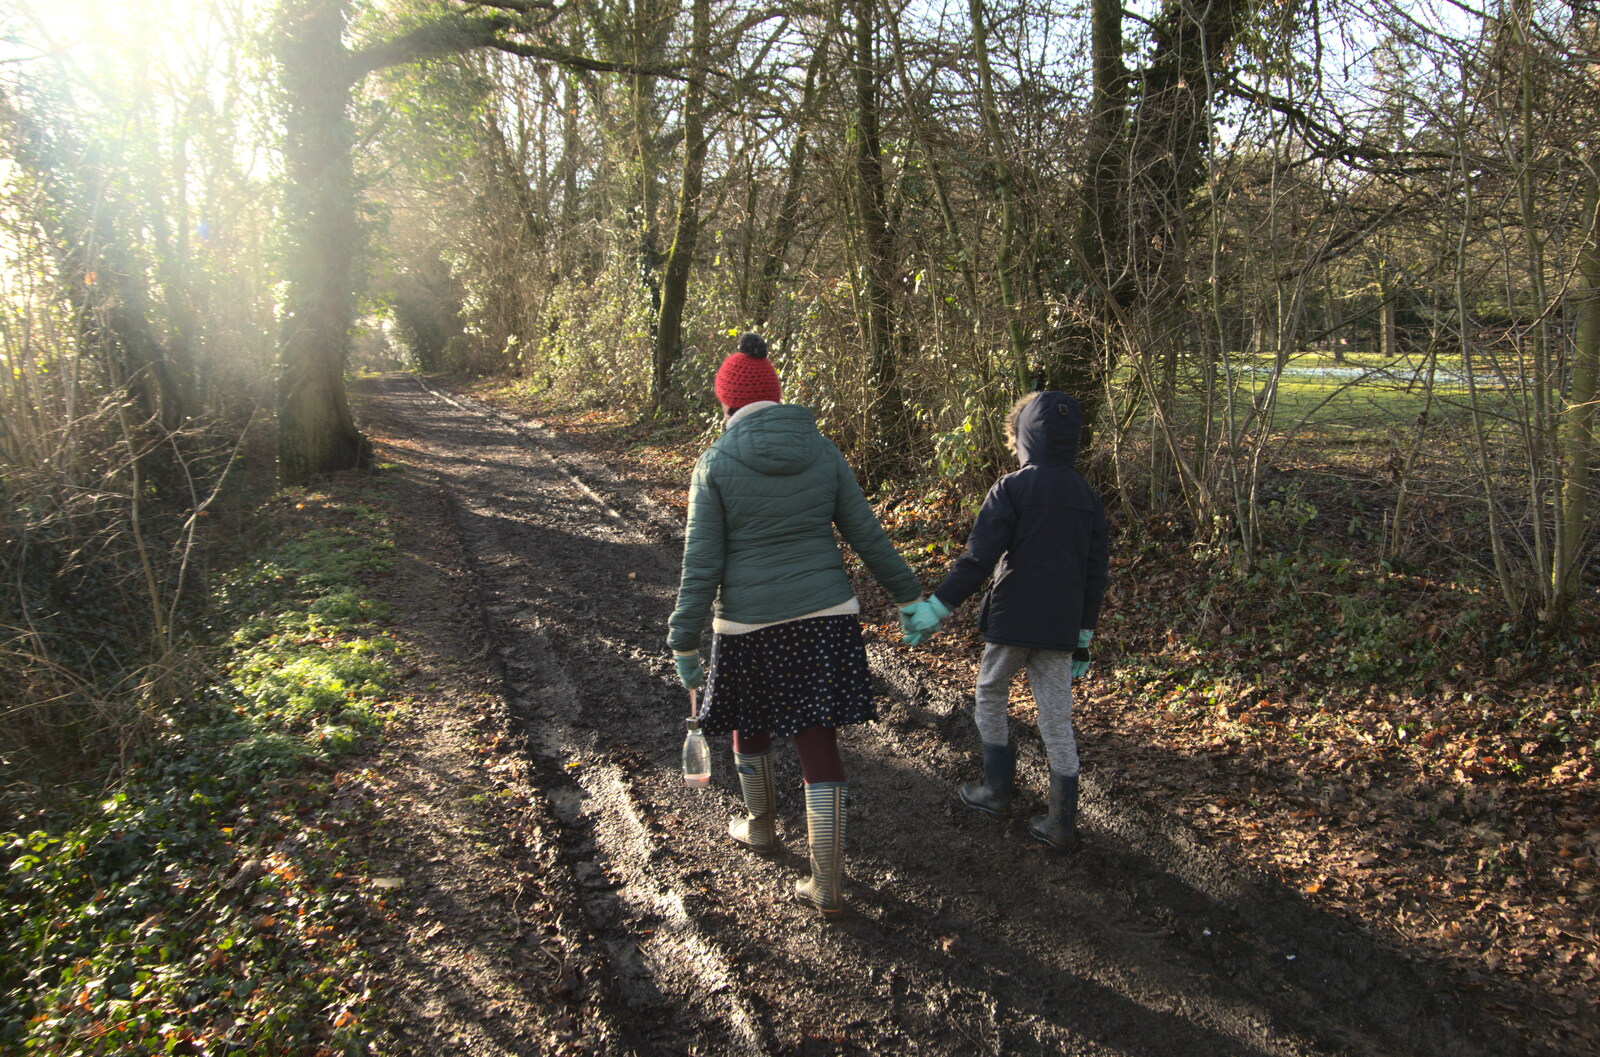 Isobel and Harry in the low sun from Winter Lockdown Walks, Thrandeston and Brome, Suffolk - 24th January 2021